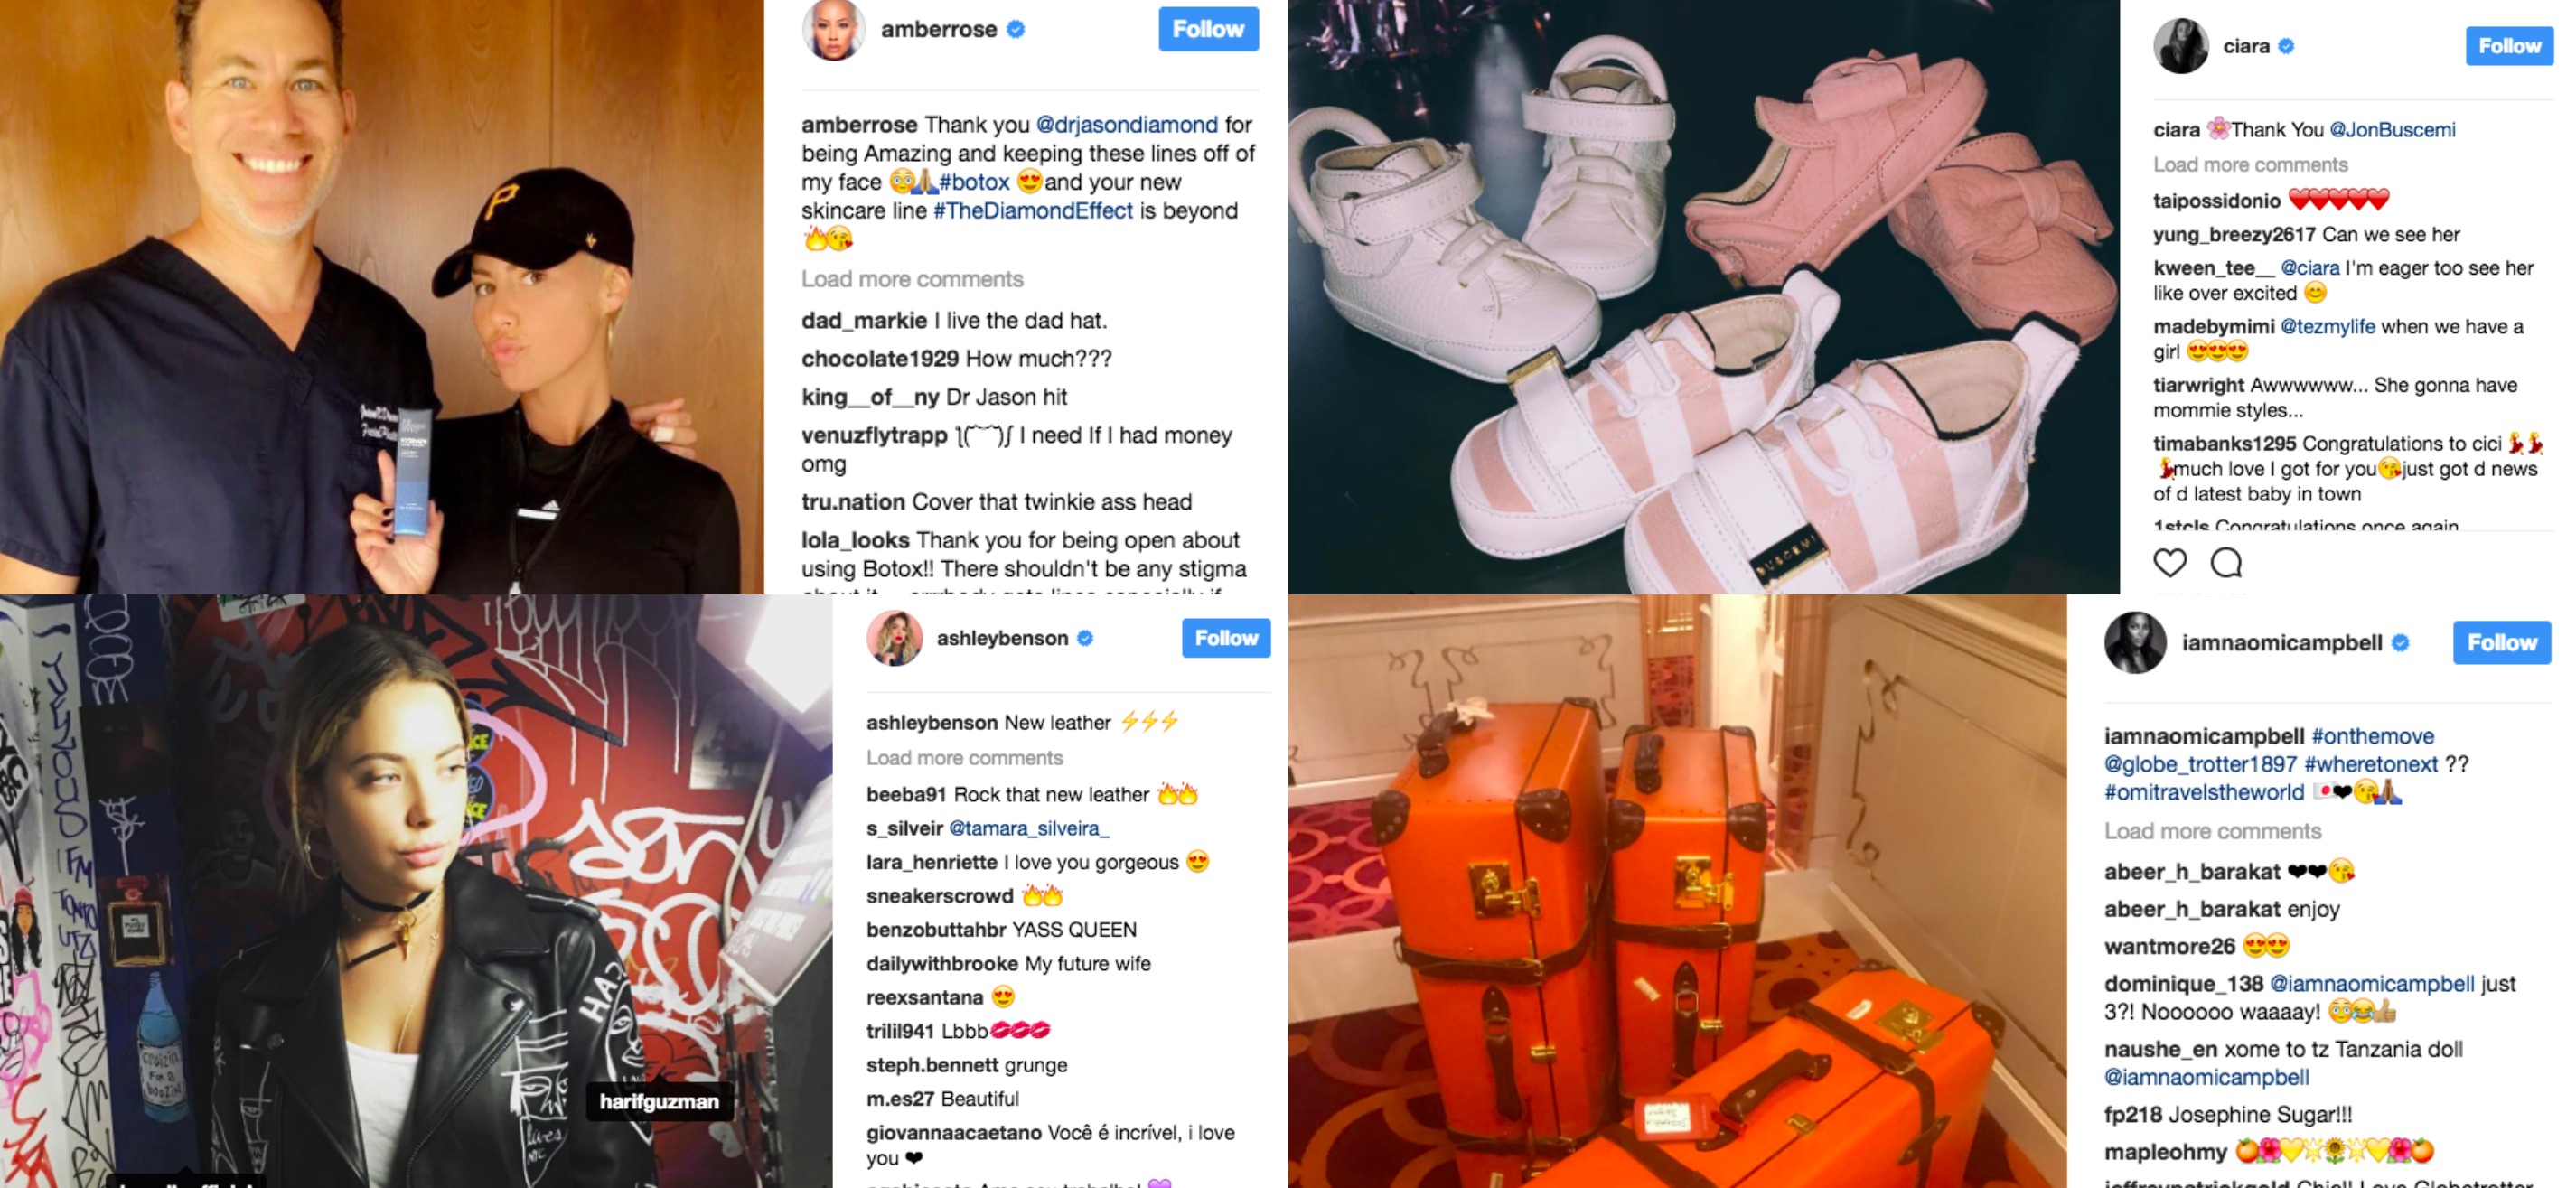 Feds Warn Lindsay Lohan, Sofia Vergara & Other Instagram Celebs To Stop Their Stealth Social Advertising